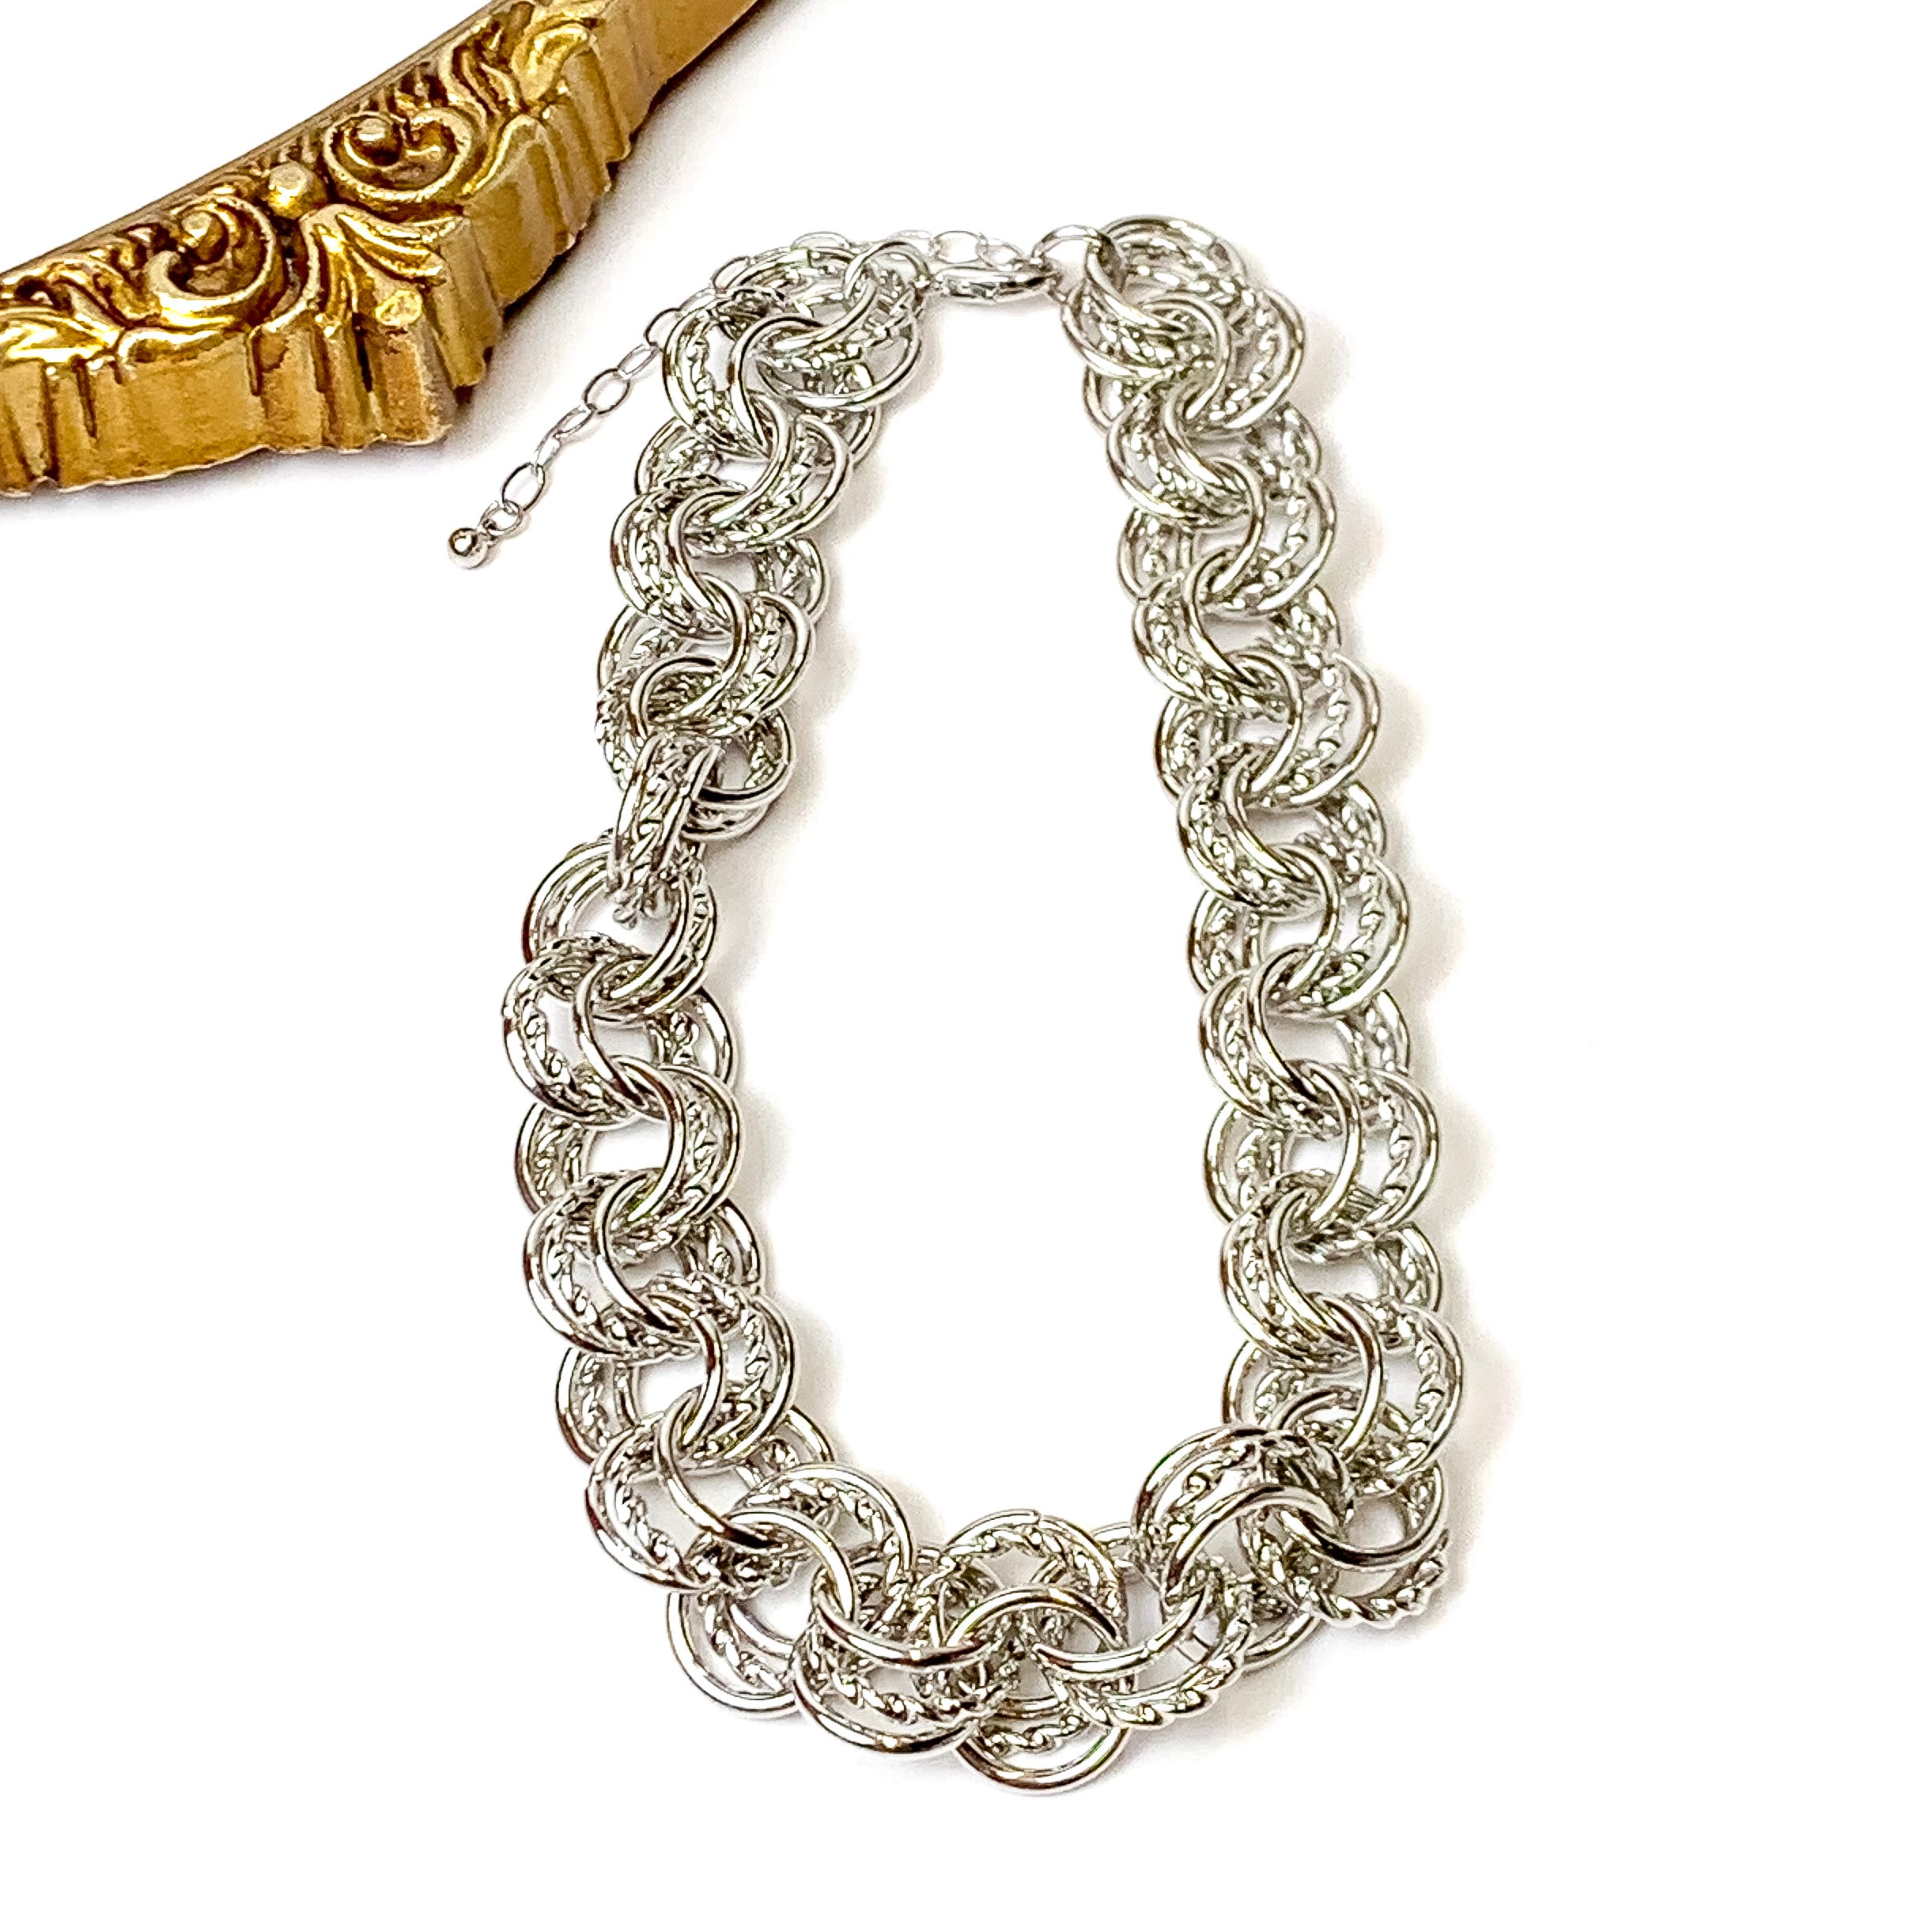 Triple Link Chunky Silver Tone Chain Necklace - Giddy Up Glamour Boutique